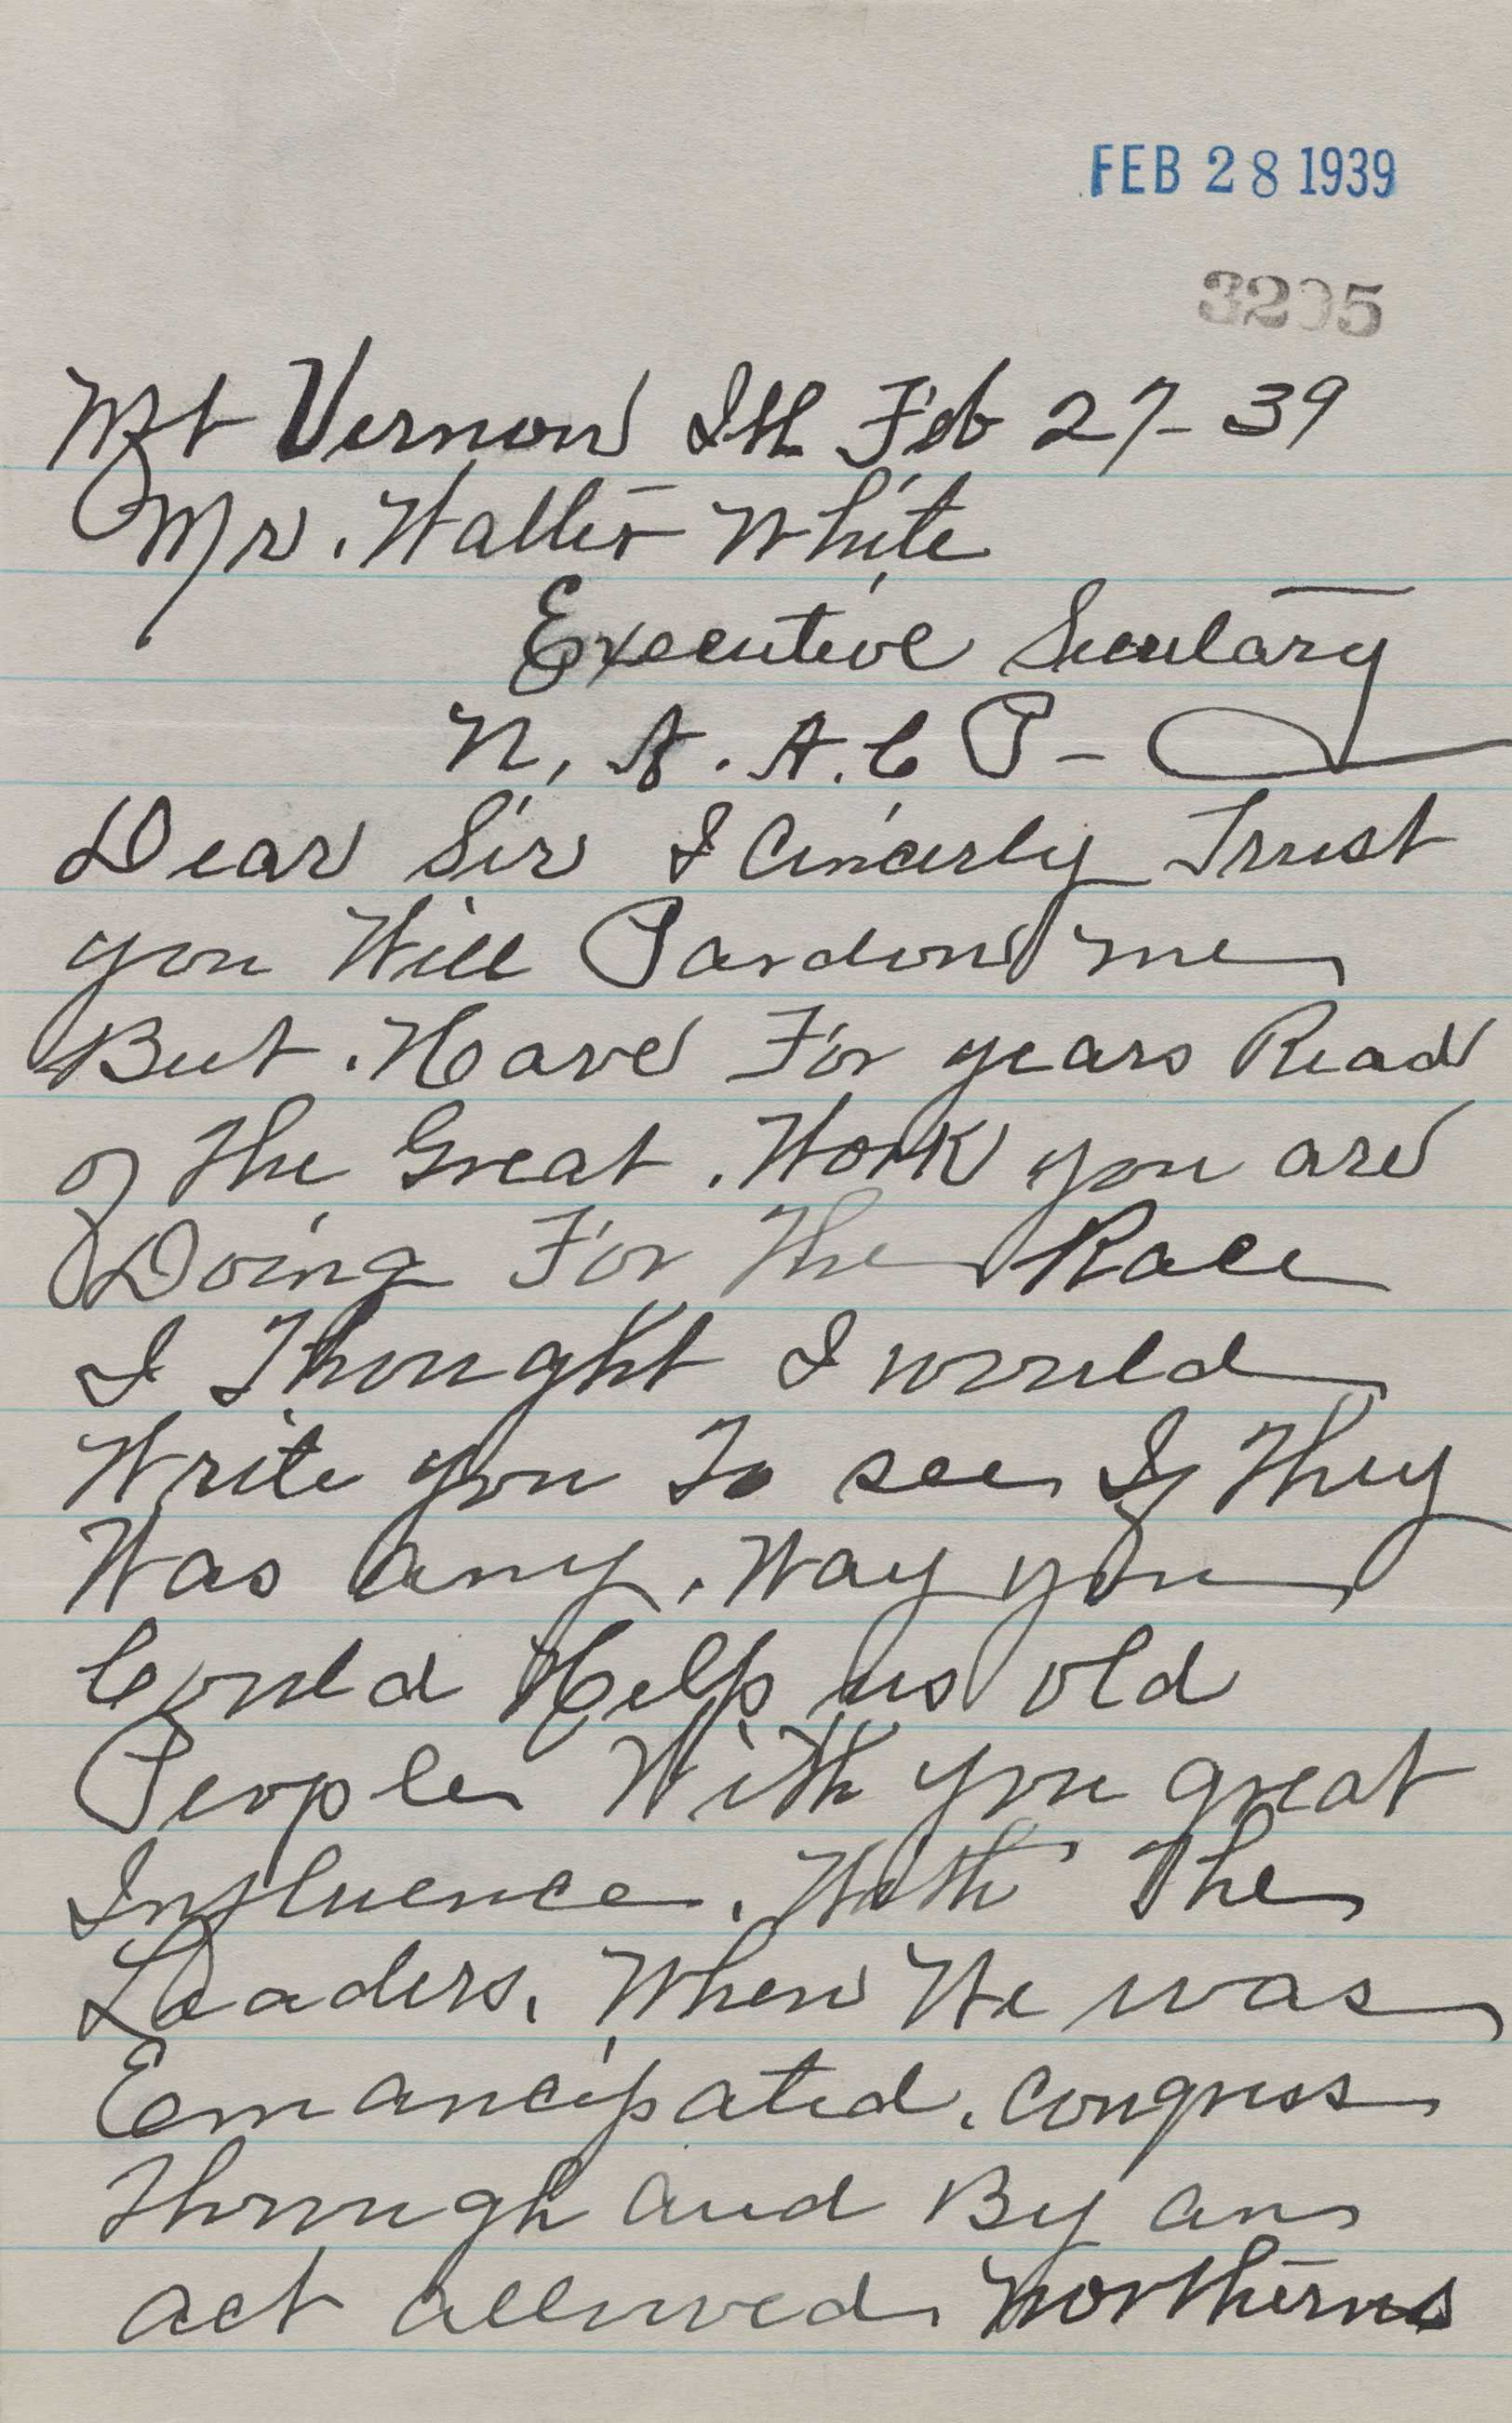 A handwritten letter by Henry L. Thomas on a loosely It is dated Feb 28 1939